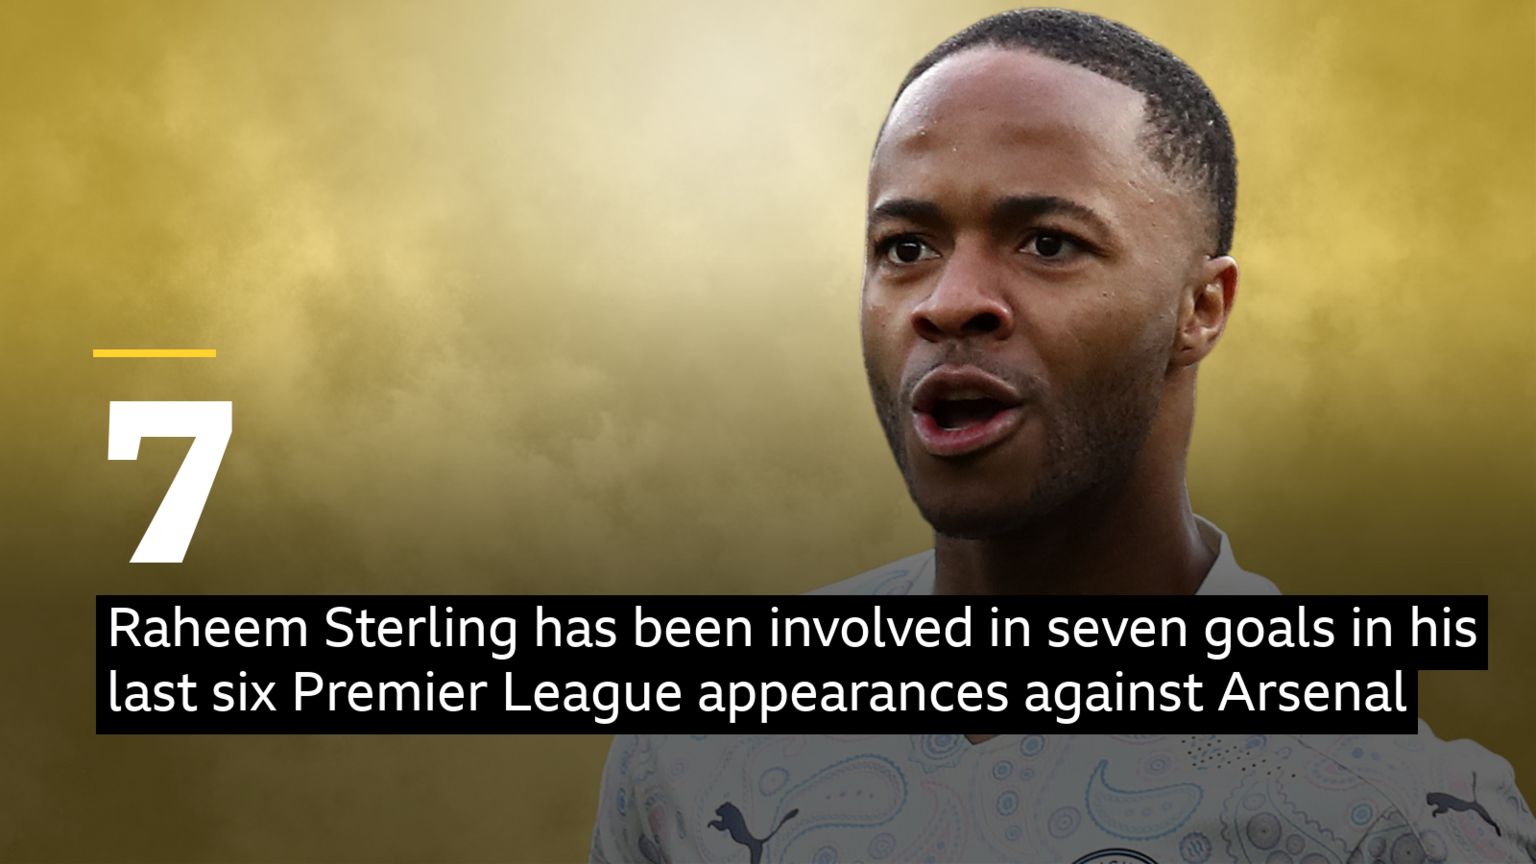 Raheem Sterling has been involved in seven goals in his past six games against Arsenal